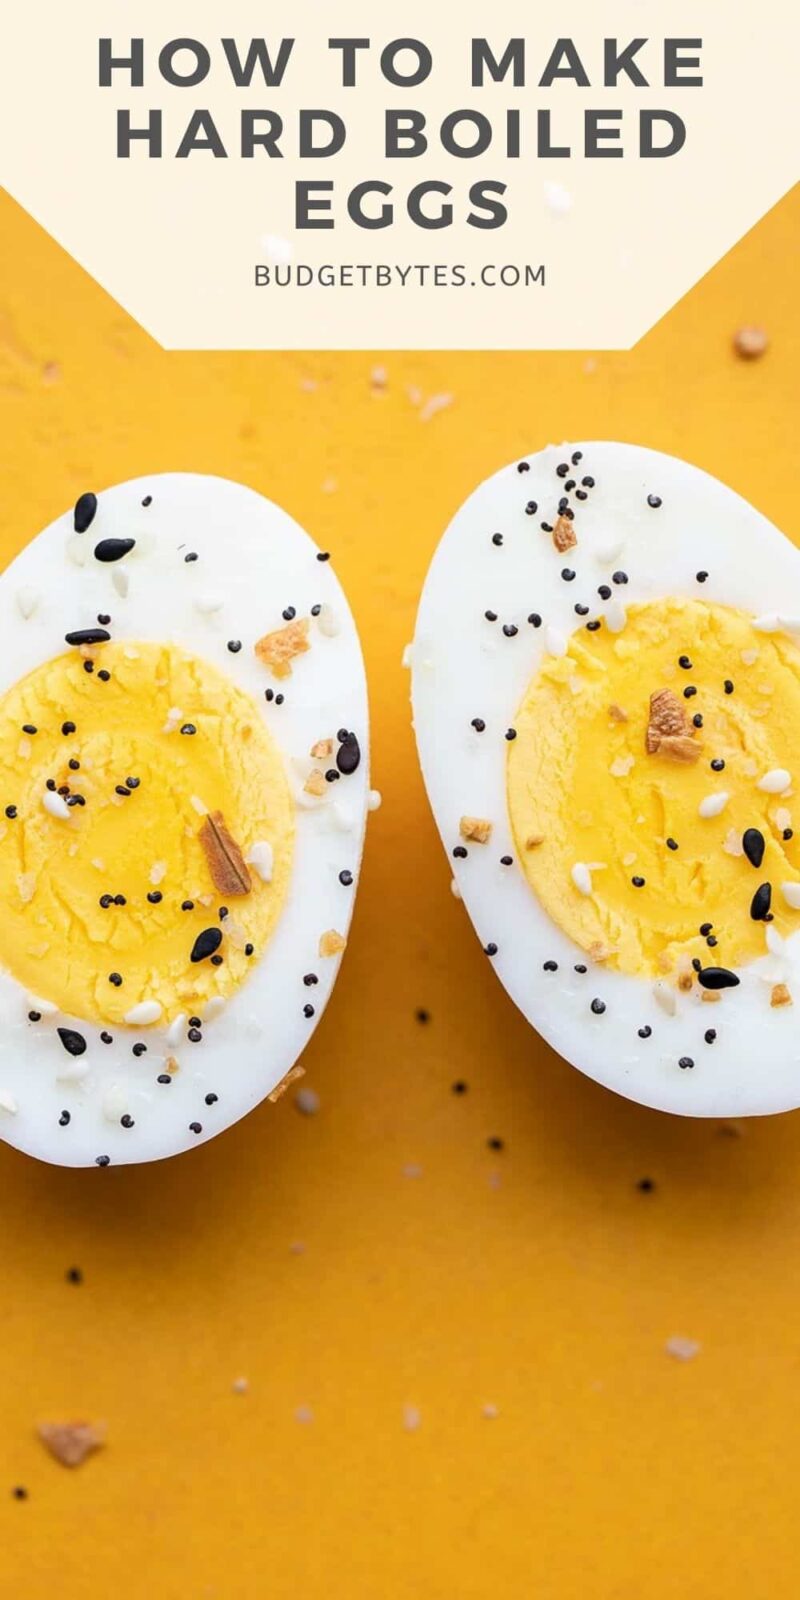 a hard boiled egg cut in half and sprinkled with everything bagel seasoning, title text at the top